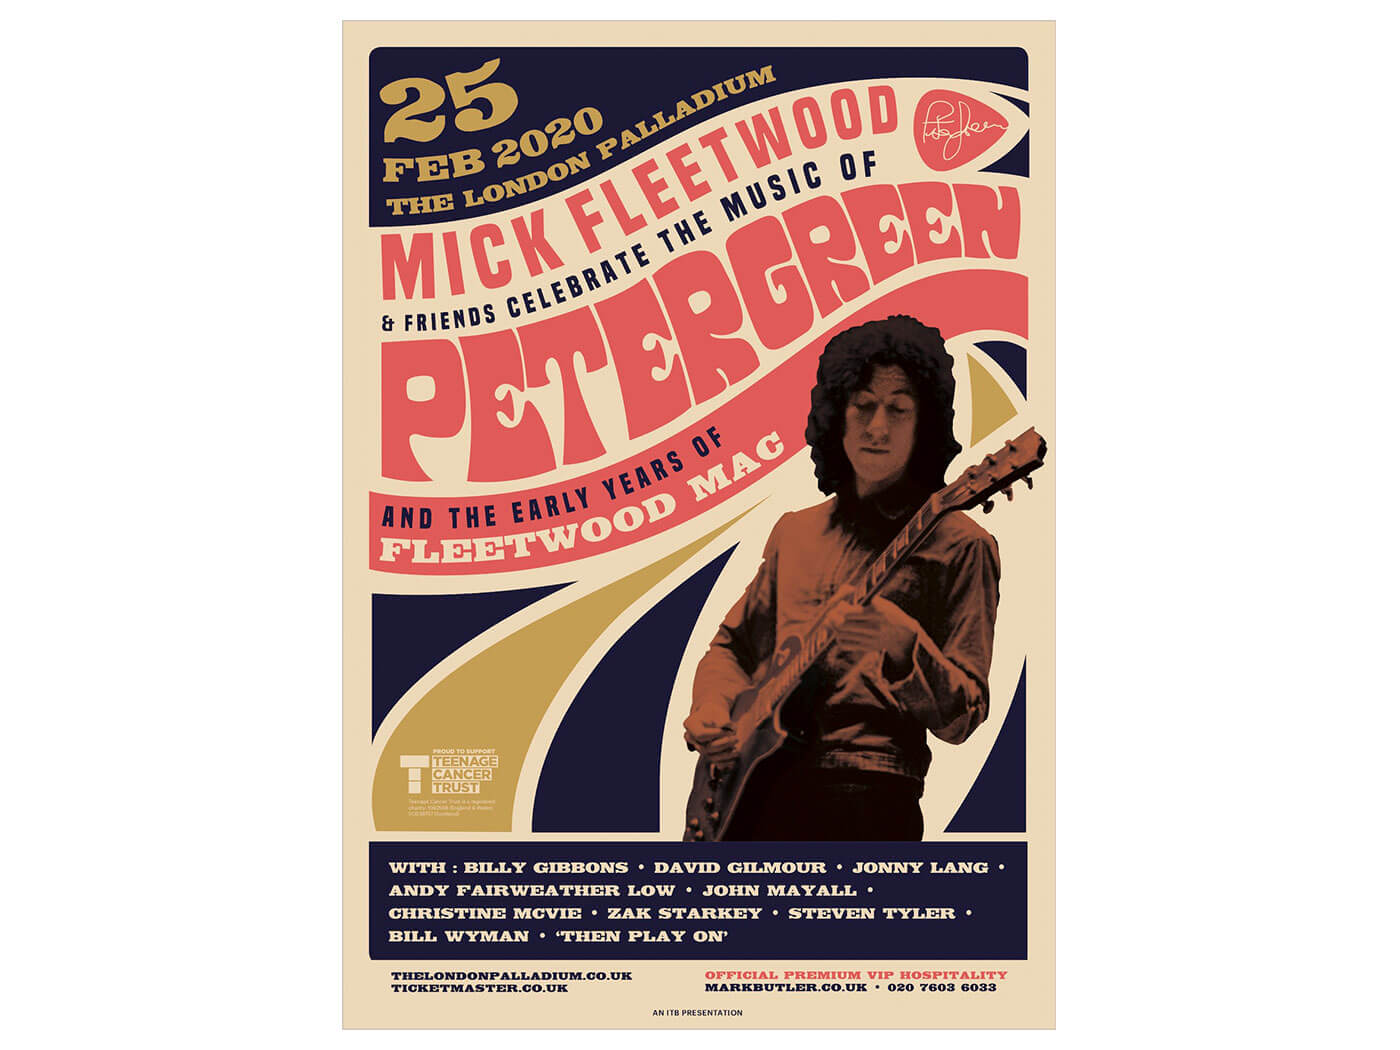 The Poster for the Peter Green tribute concert.